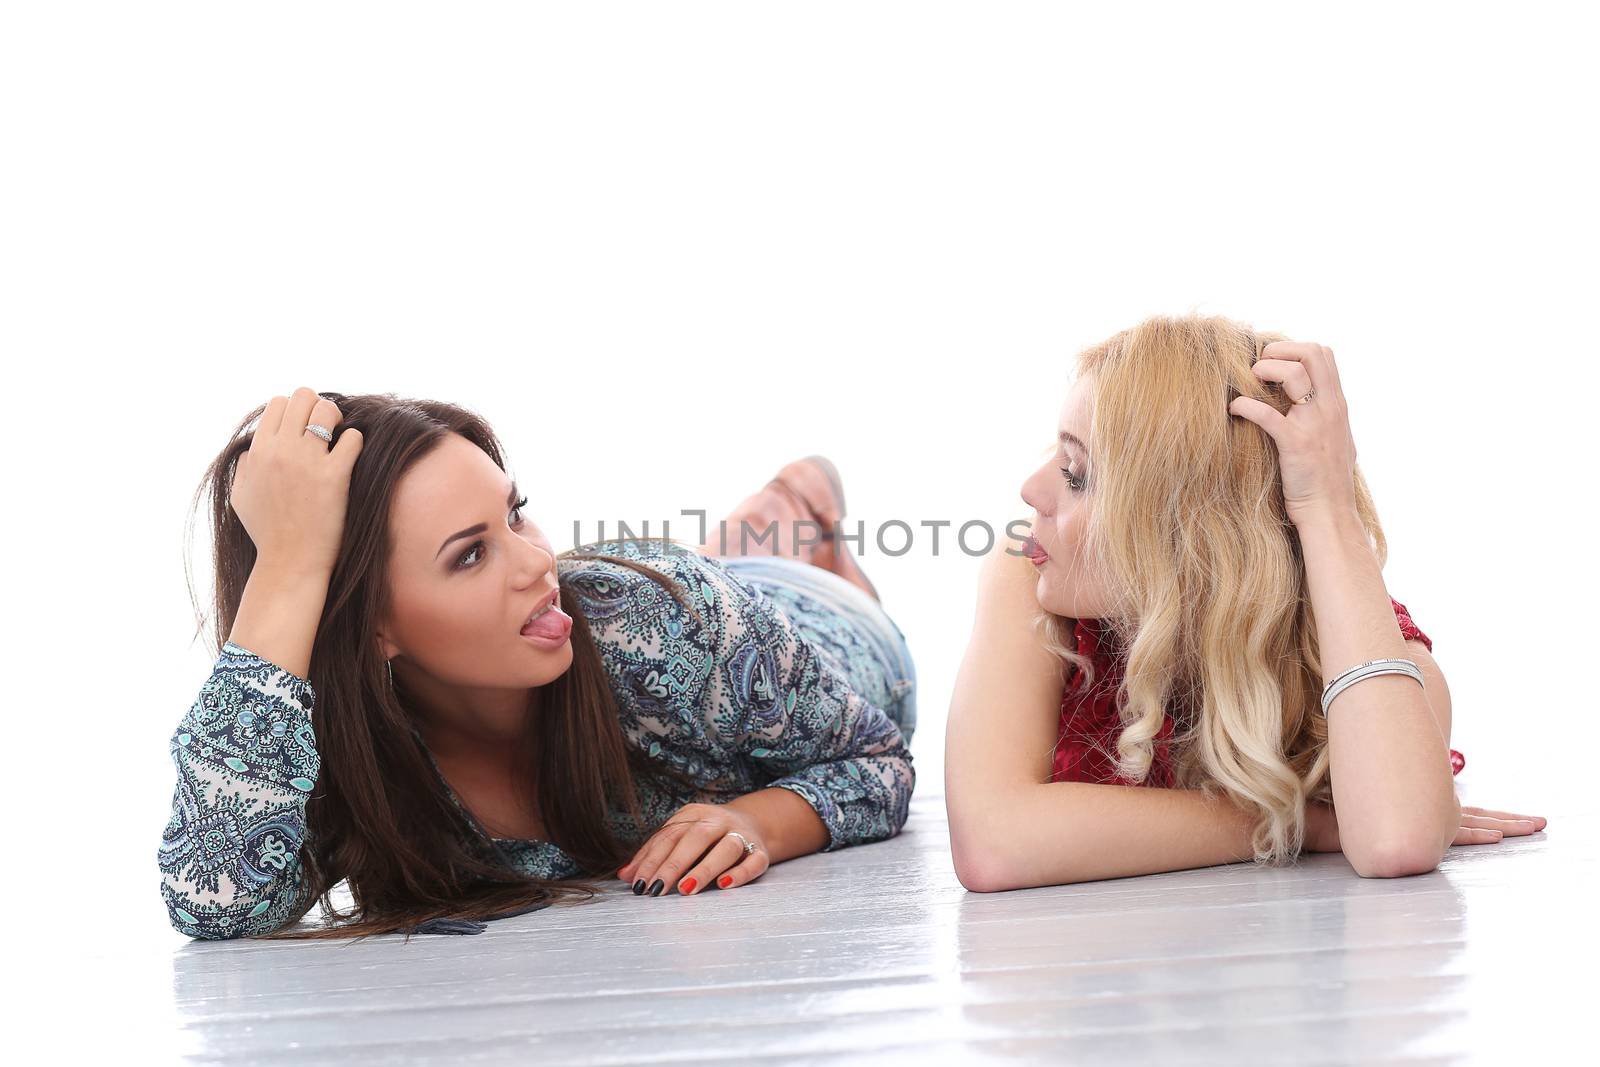 A brunette and a blonde girls are lying on the floor and posing over a white background